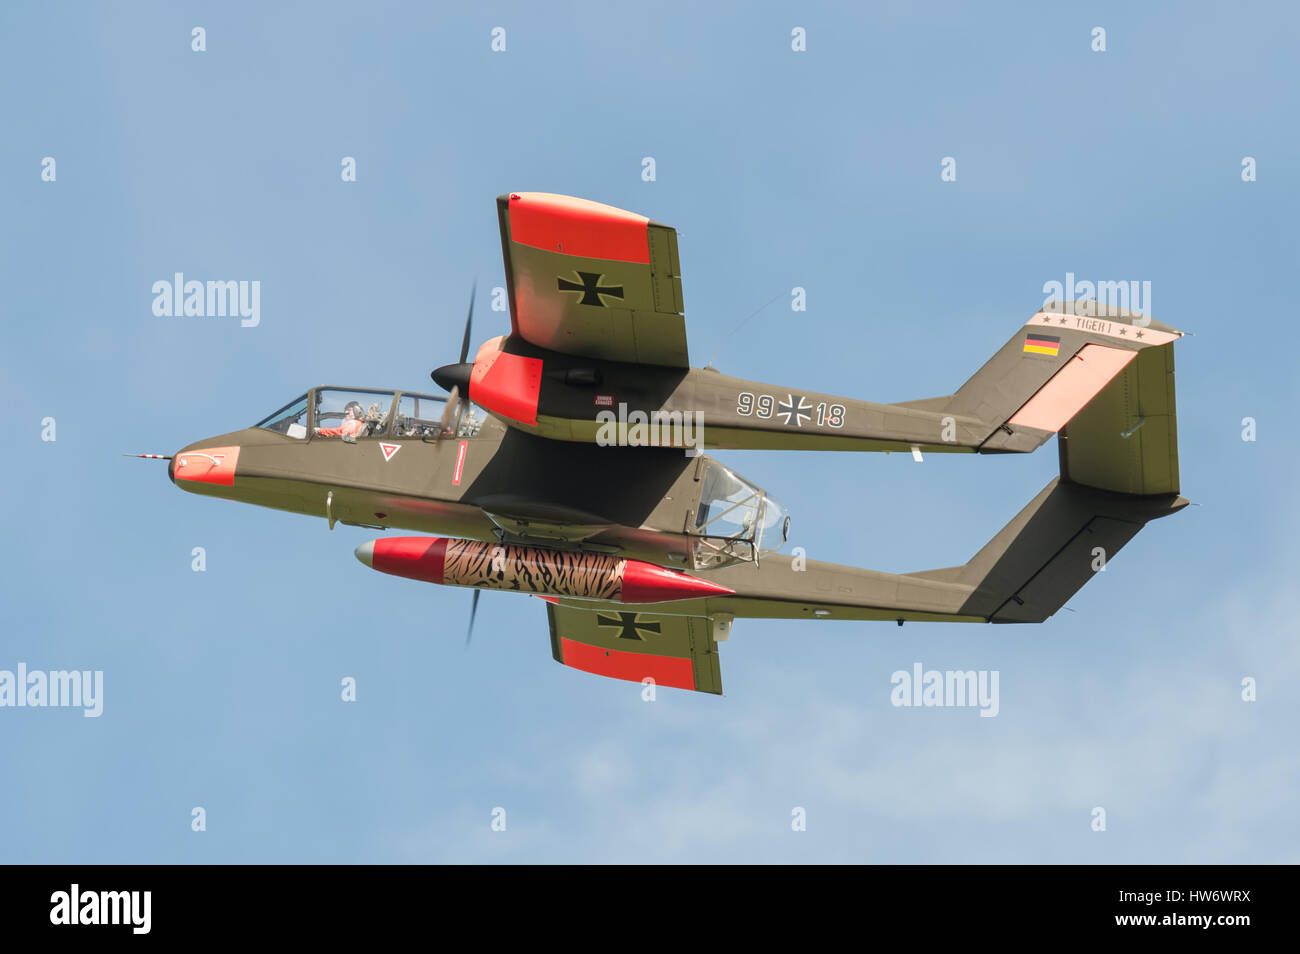 Vintage Rockwell OV-10 Bronco light attack aircraft on take-off from Farnborough, UK Stock Photo